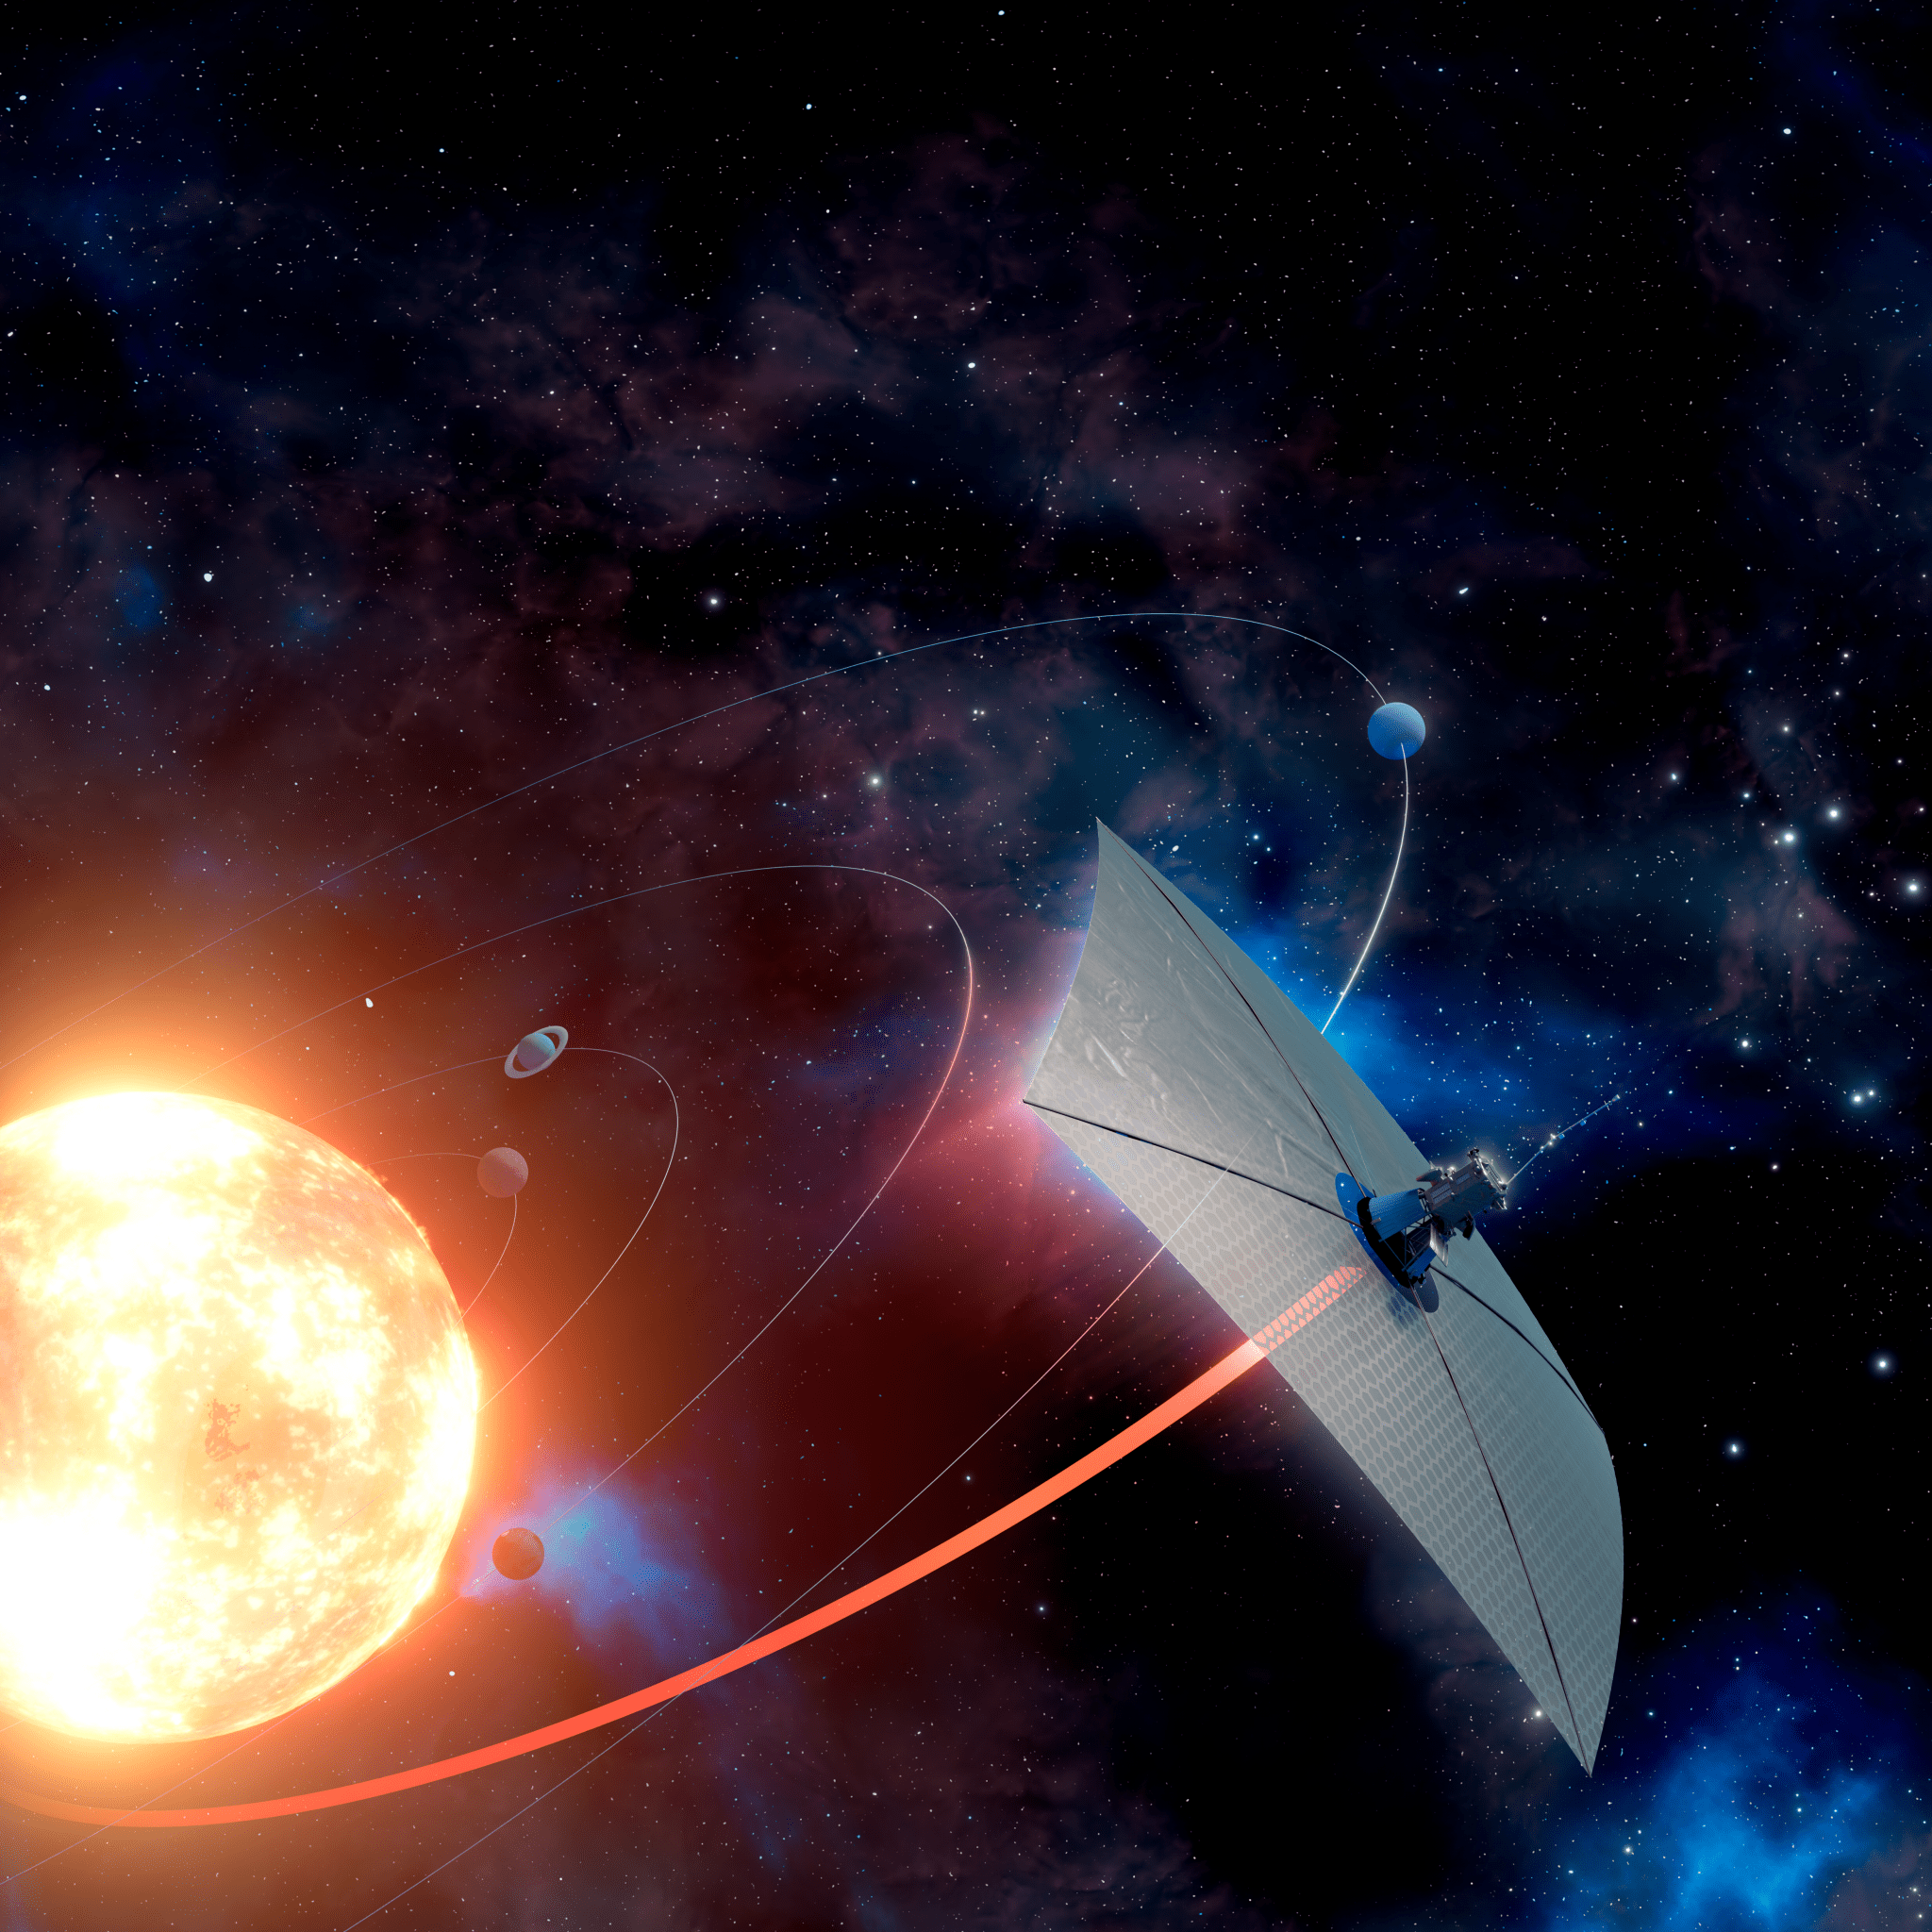 Solar Sail in space with planets in the background.